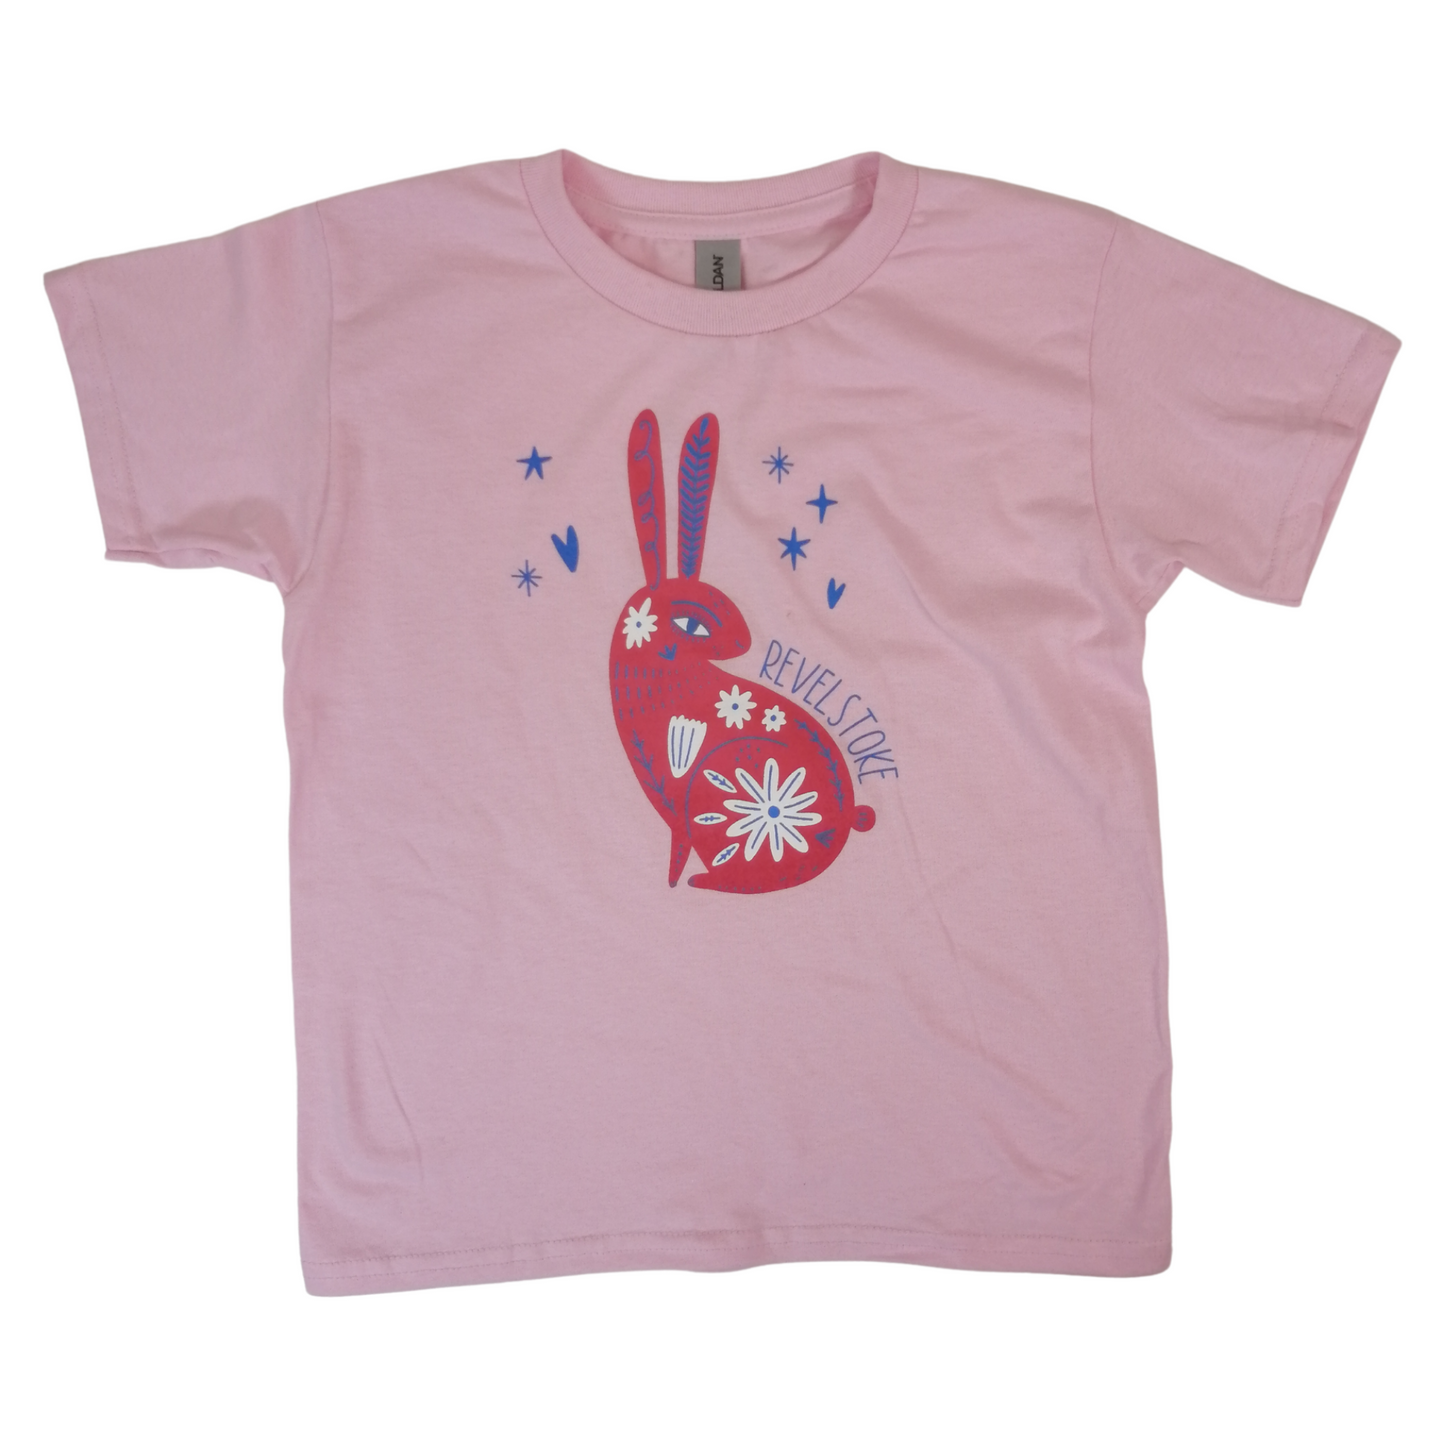 YOUTH BUNNY T SHIRT, PINK